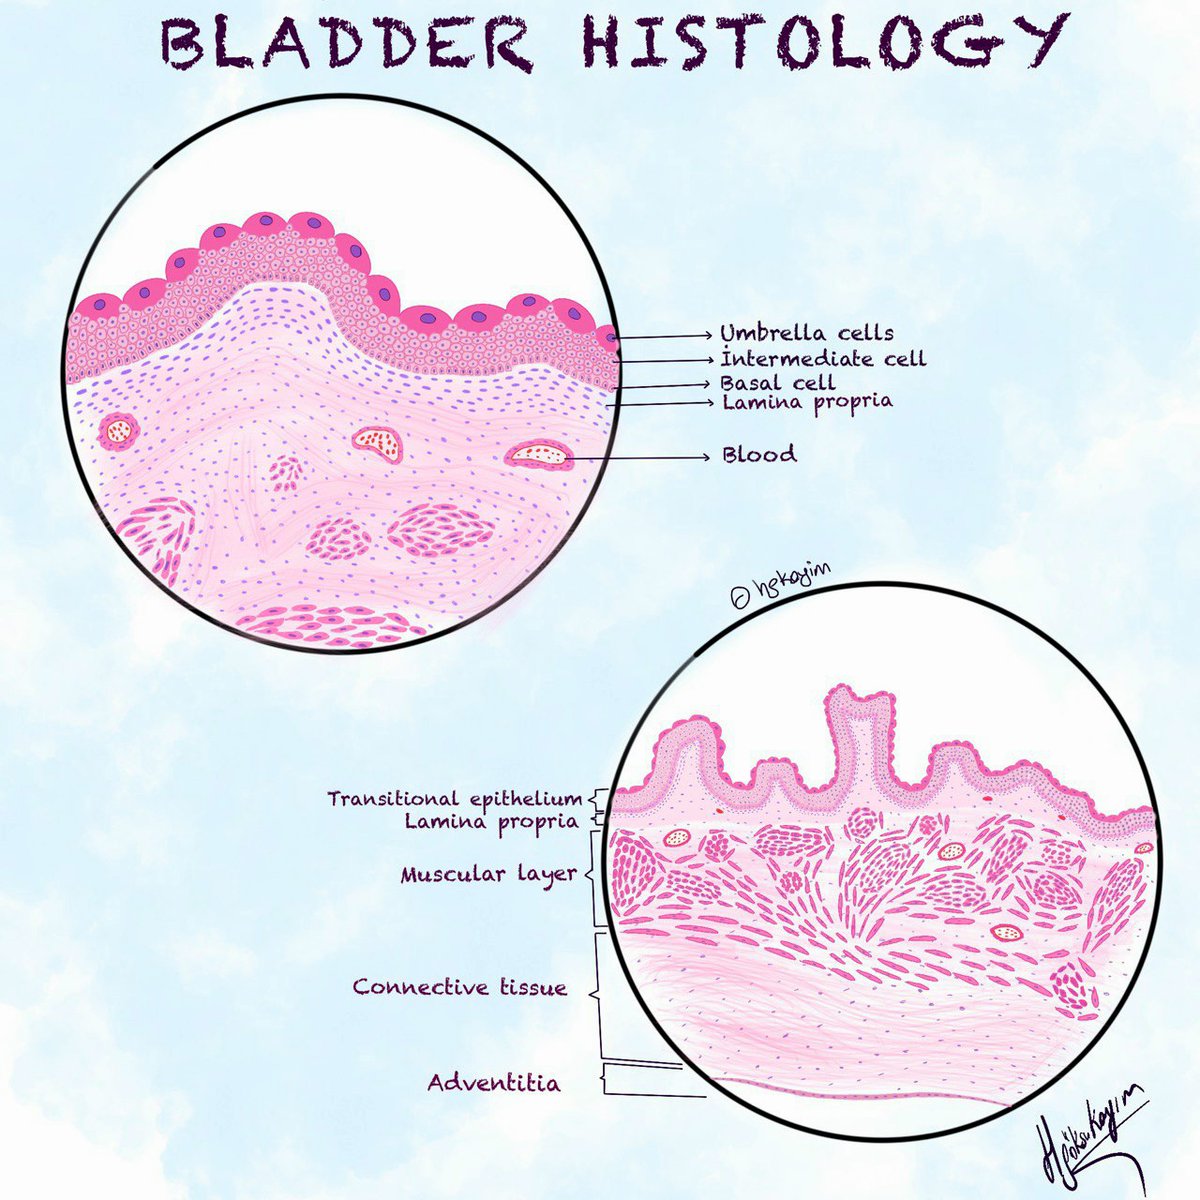 Hello #medtwitter,
How is my bladder histology drawing? 
Would you like me to draw a 3D version of the bladder?
Keep following 😉
#medstudent #pathtwitter @pembeoltulu #histoart #pathart